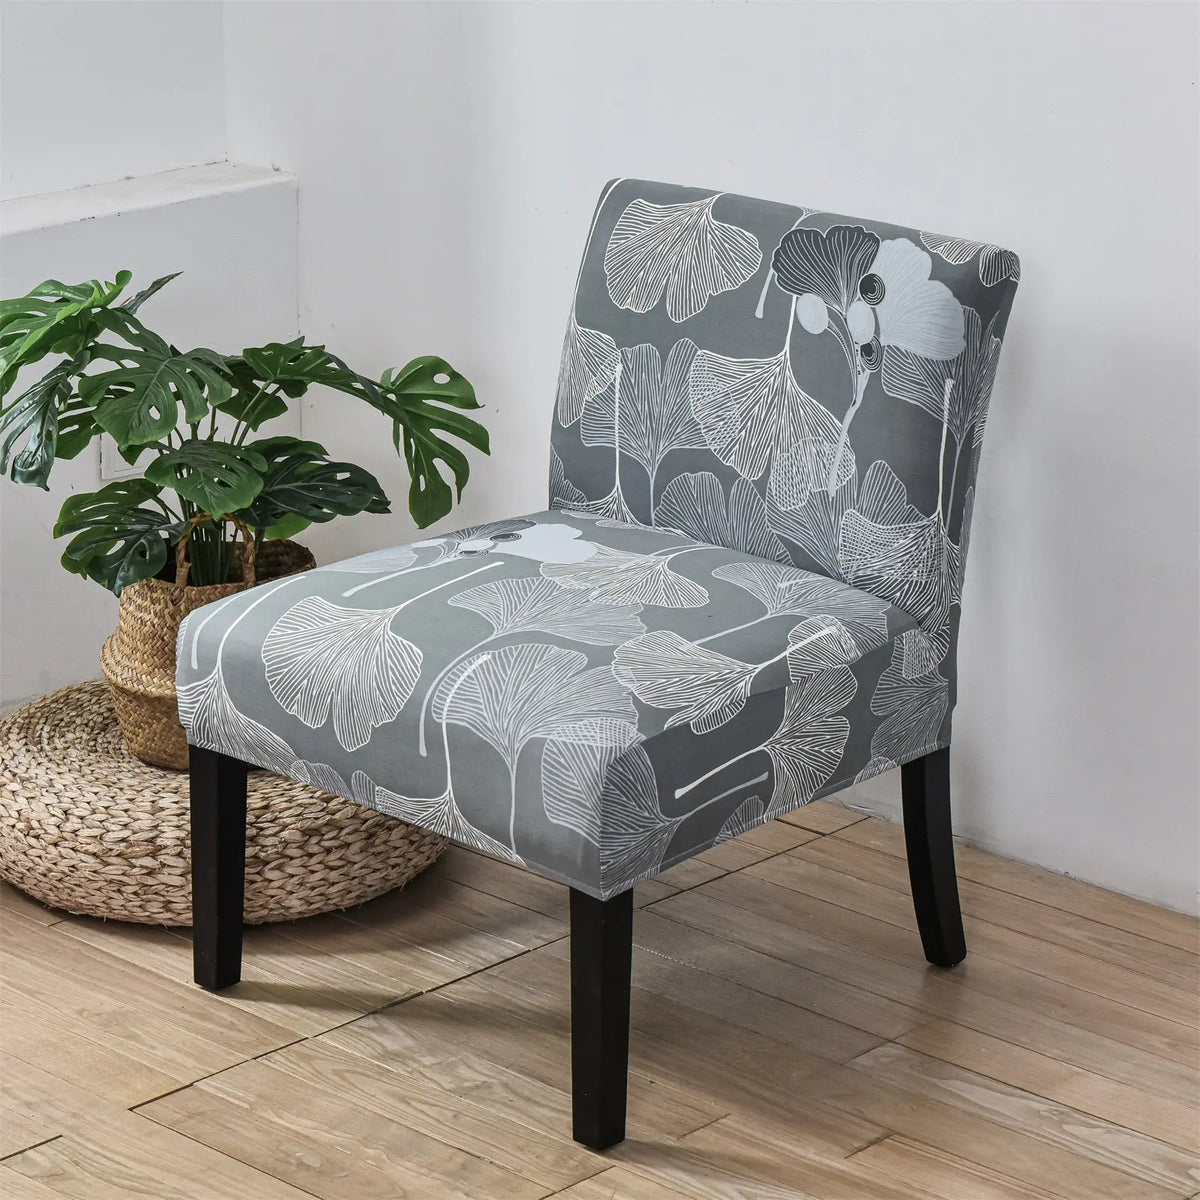 Ginkgo Biloba Stretch Accent Chair Cover Elastic Armless Chair Sofa Slipcover Furniture Protector Top Level Crfatop %sku%